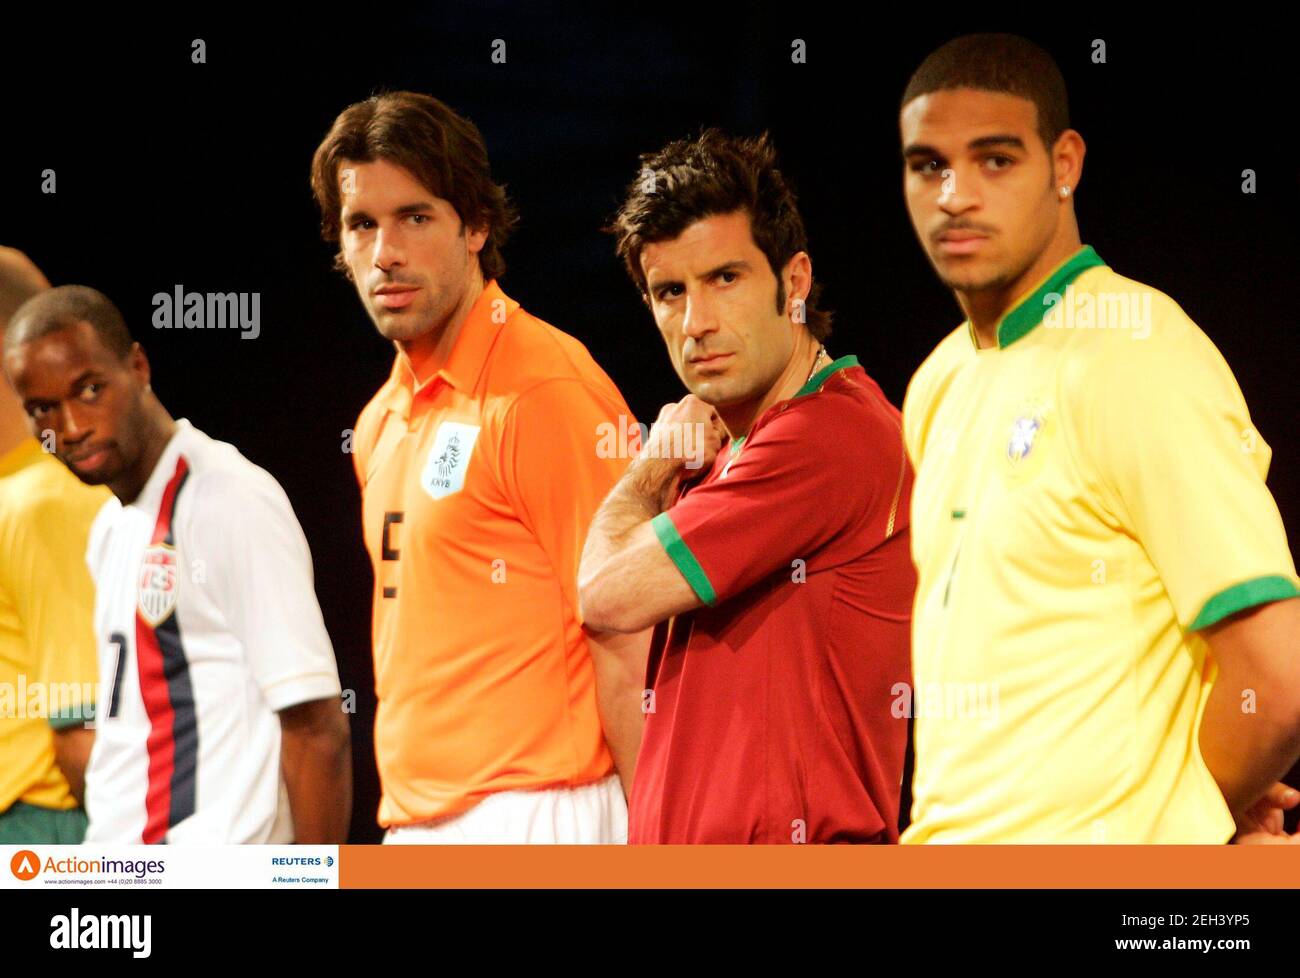 Football - Nike - 2006 World Cup Official Kit Launch for Brazil, Portugal, Australia, Holland, Korea, Mexico, Croatia & USA - Olympic Stadium, Berlin, Germany - 13/2/06  (L-R) Damarcus Beasley of the U.S., Holland's Ruud van Nistelrooy, Portugal's Luis Figo and Brazil's Adriano pose with their kits for the FIFA World Cup 2006  Mandatory Credit: Action Images / Tobias Schwarz  Livepic Stock Photo